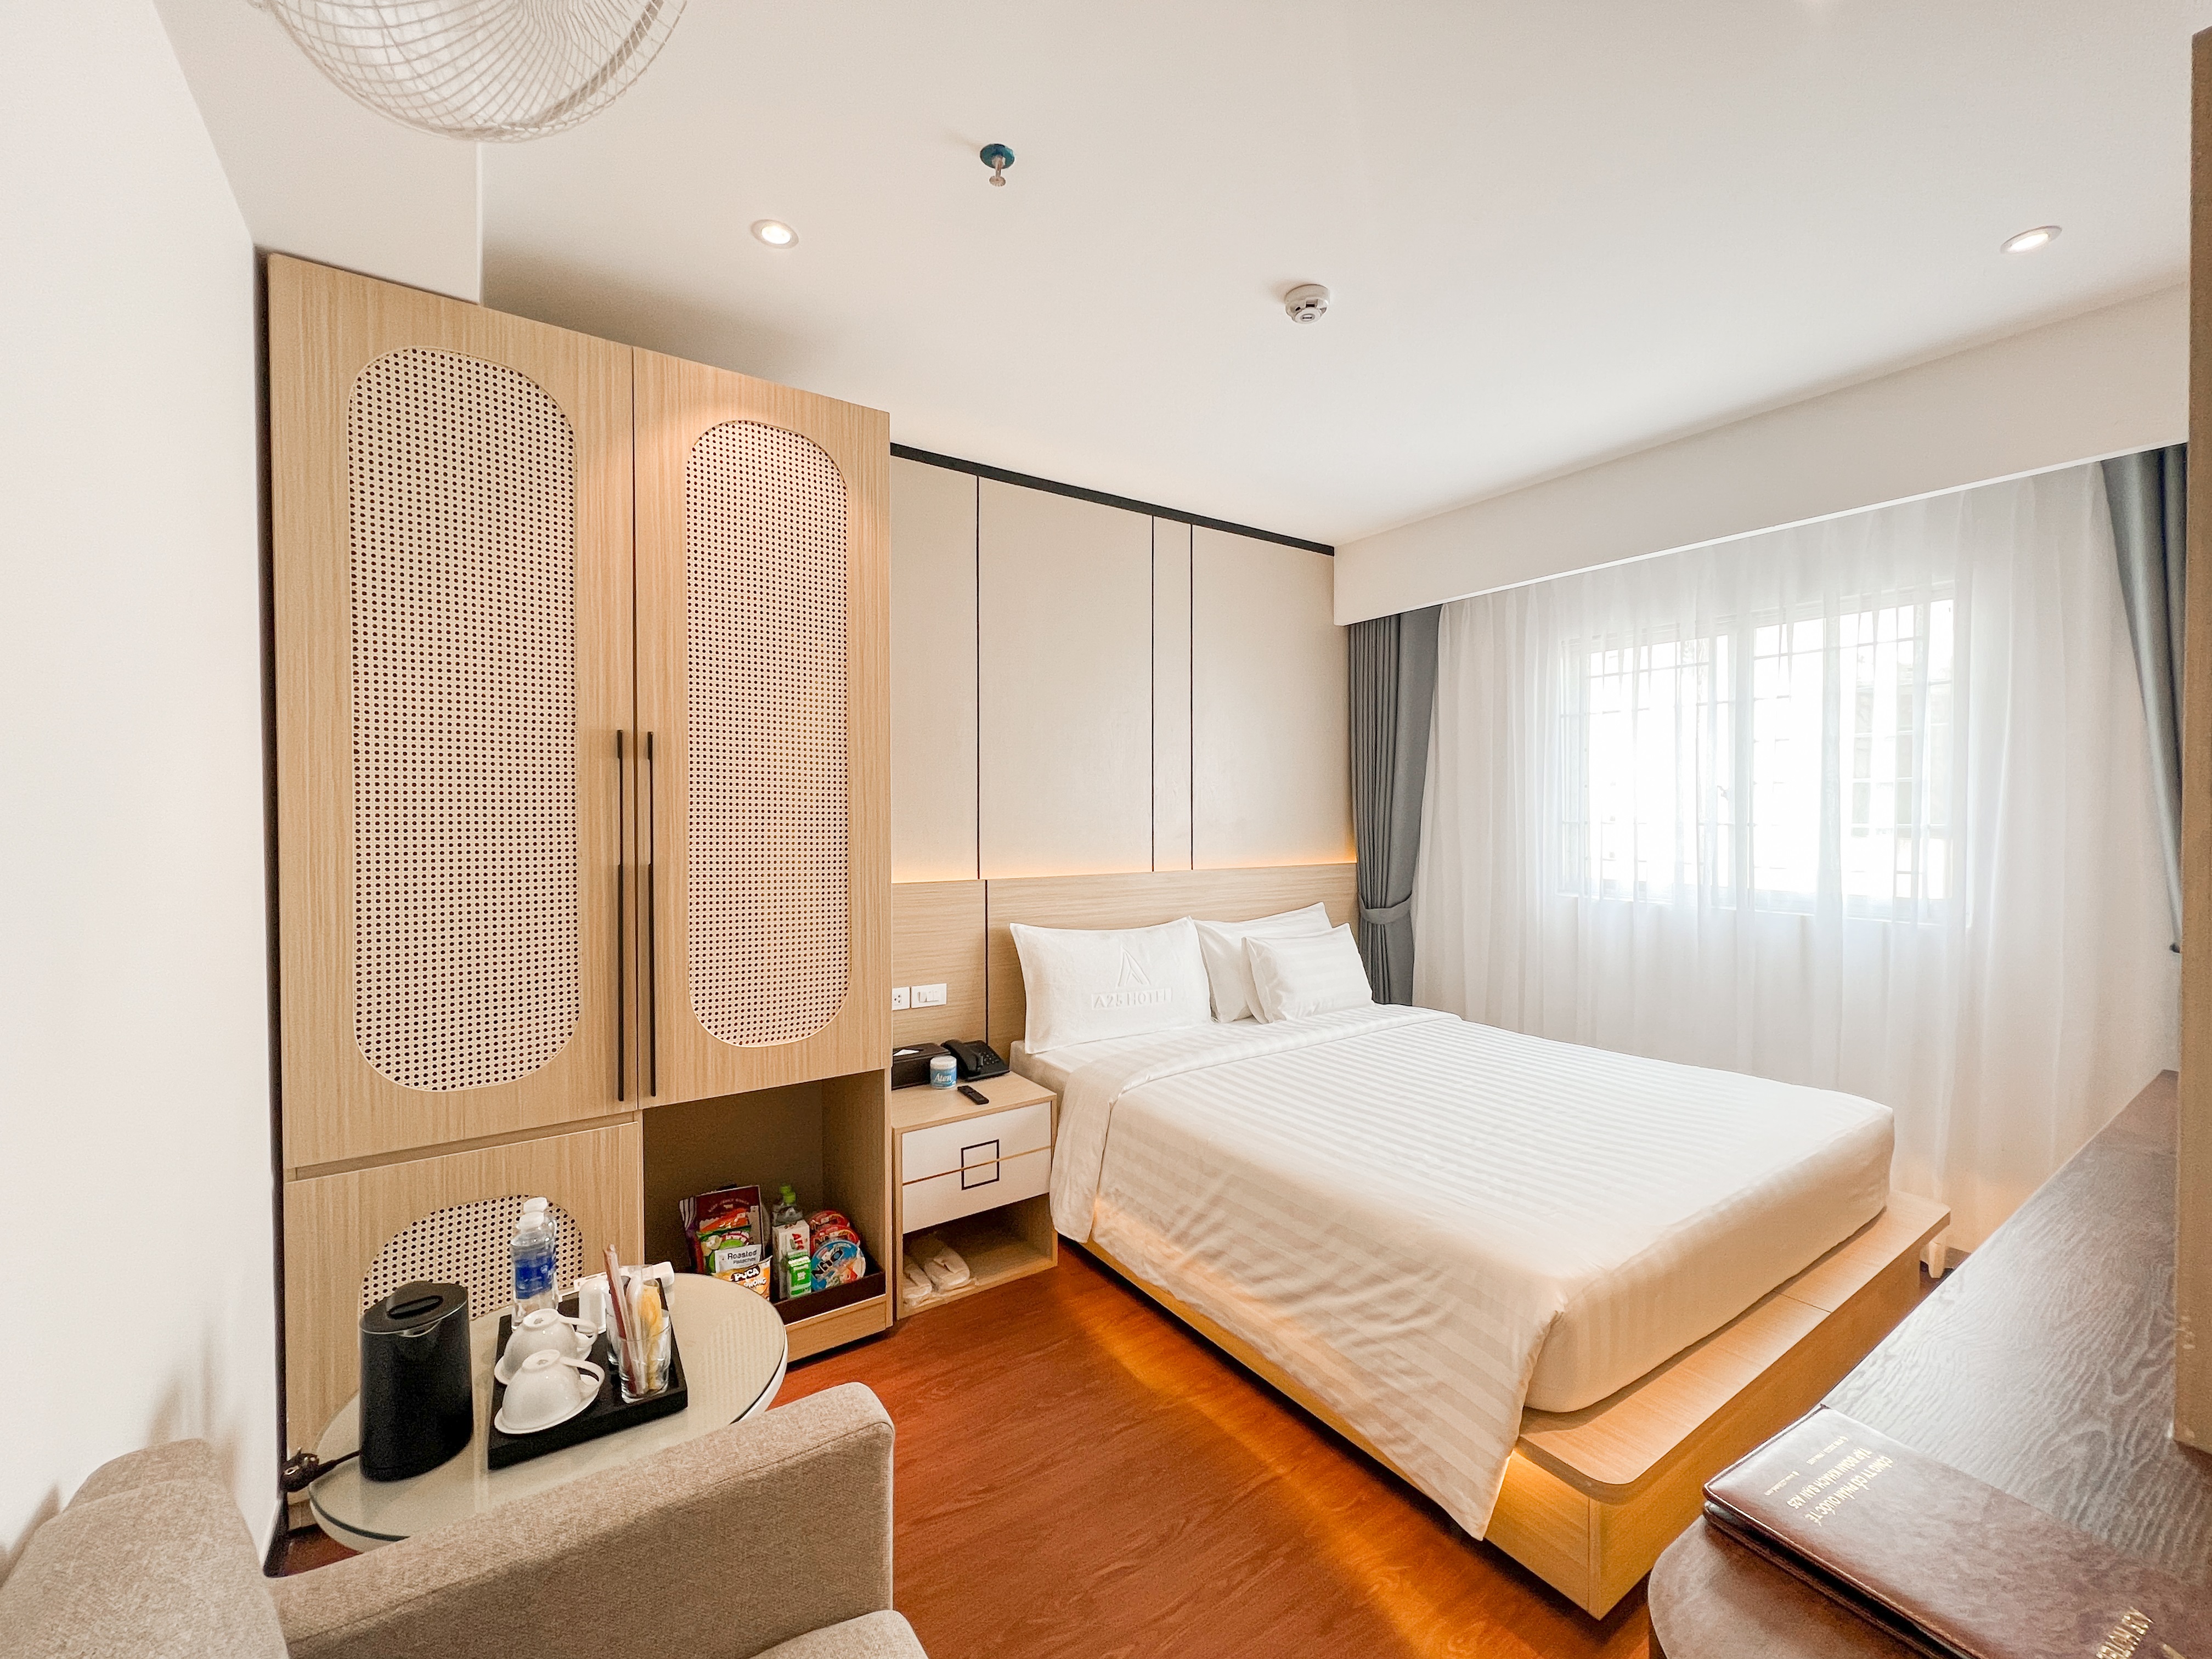 a25-luxury-hotel-277-le-thanh-ton